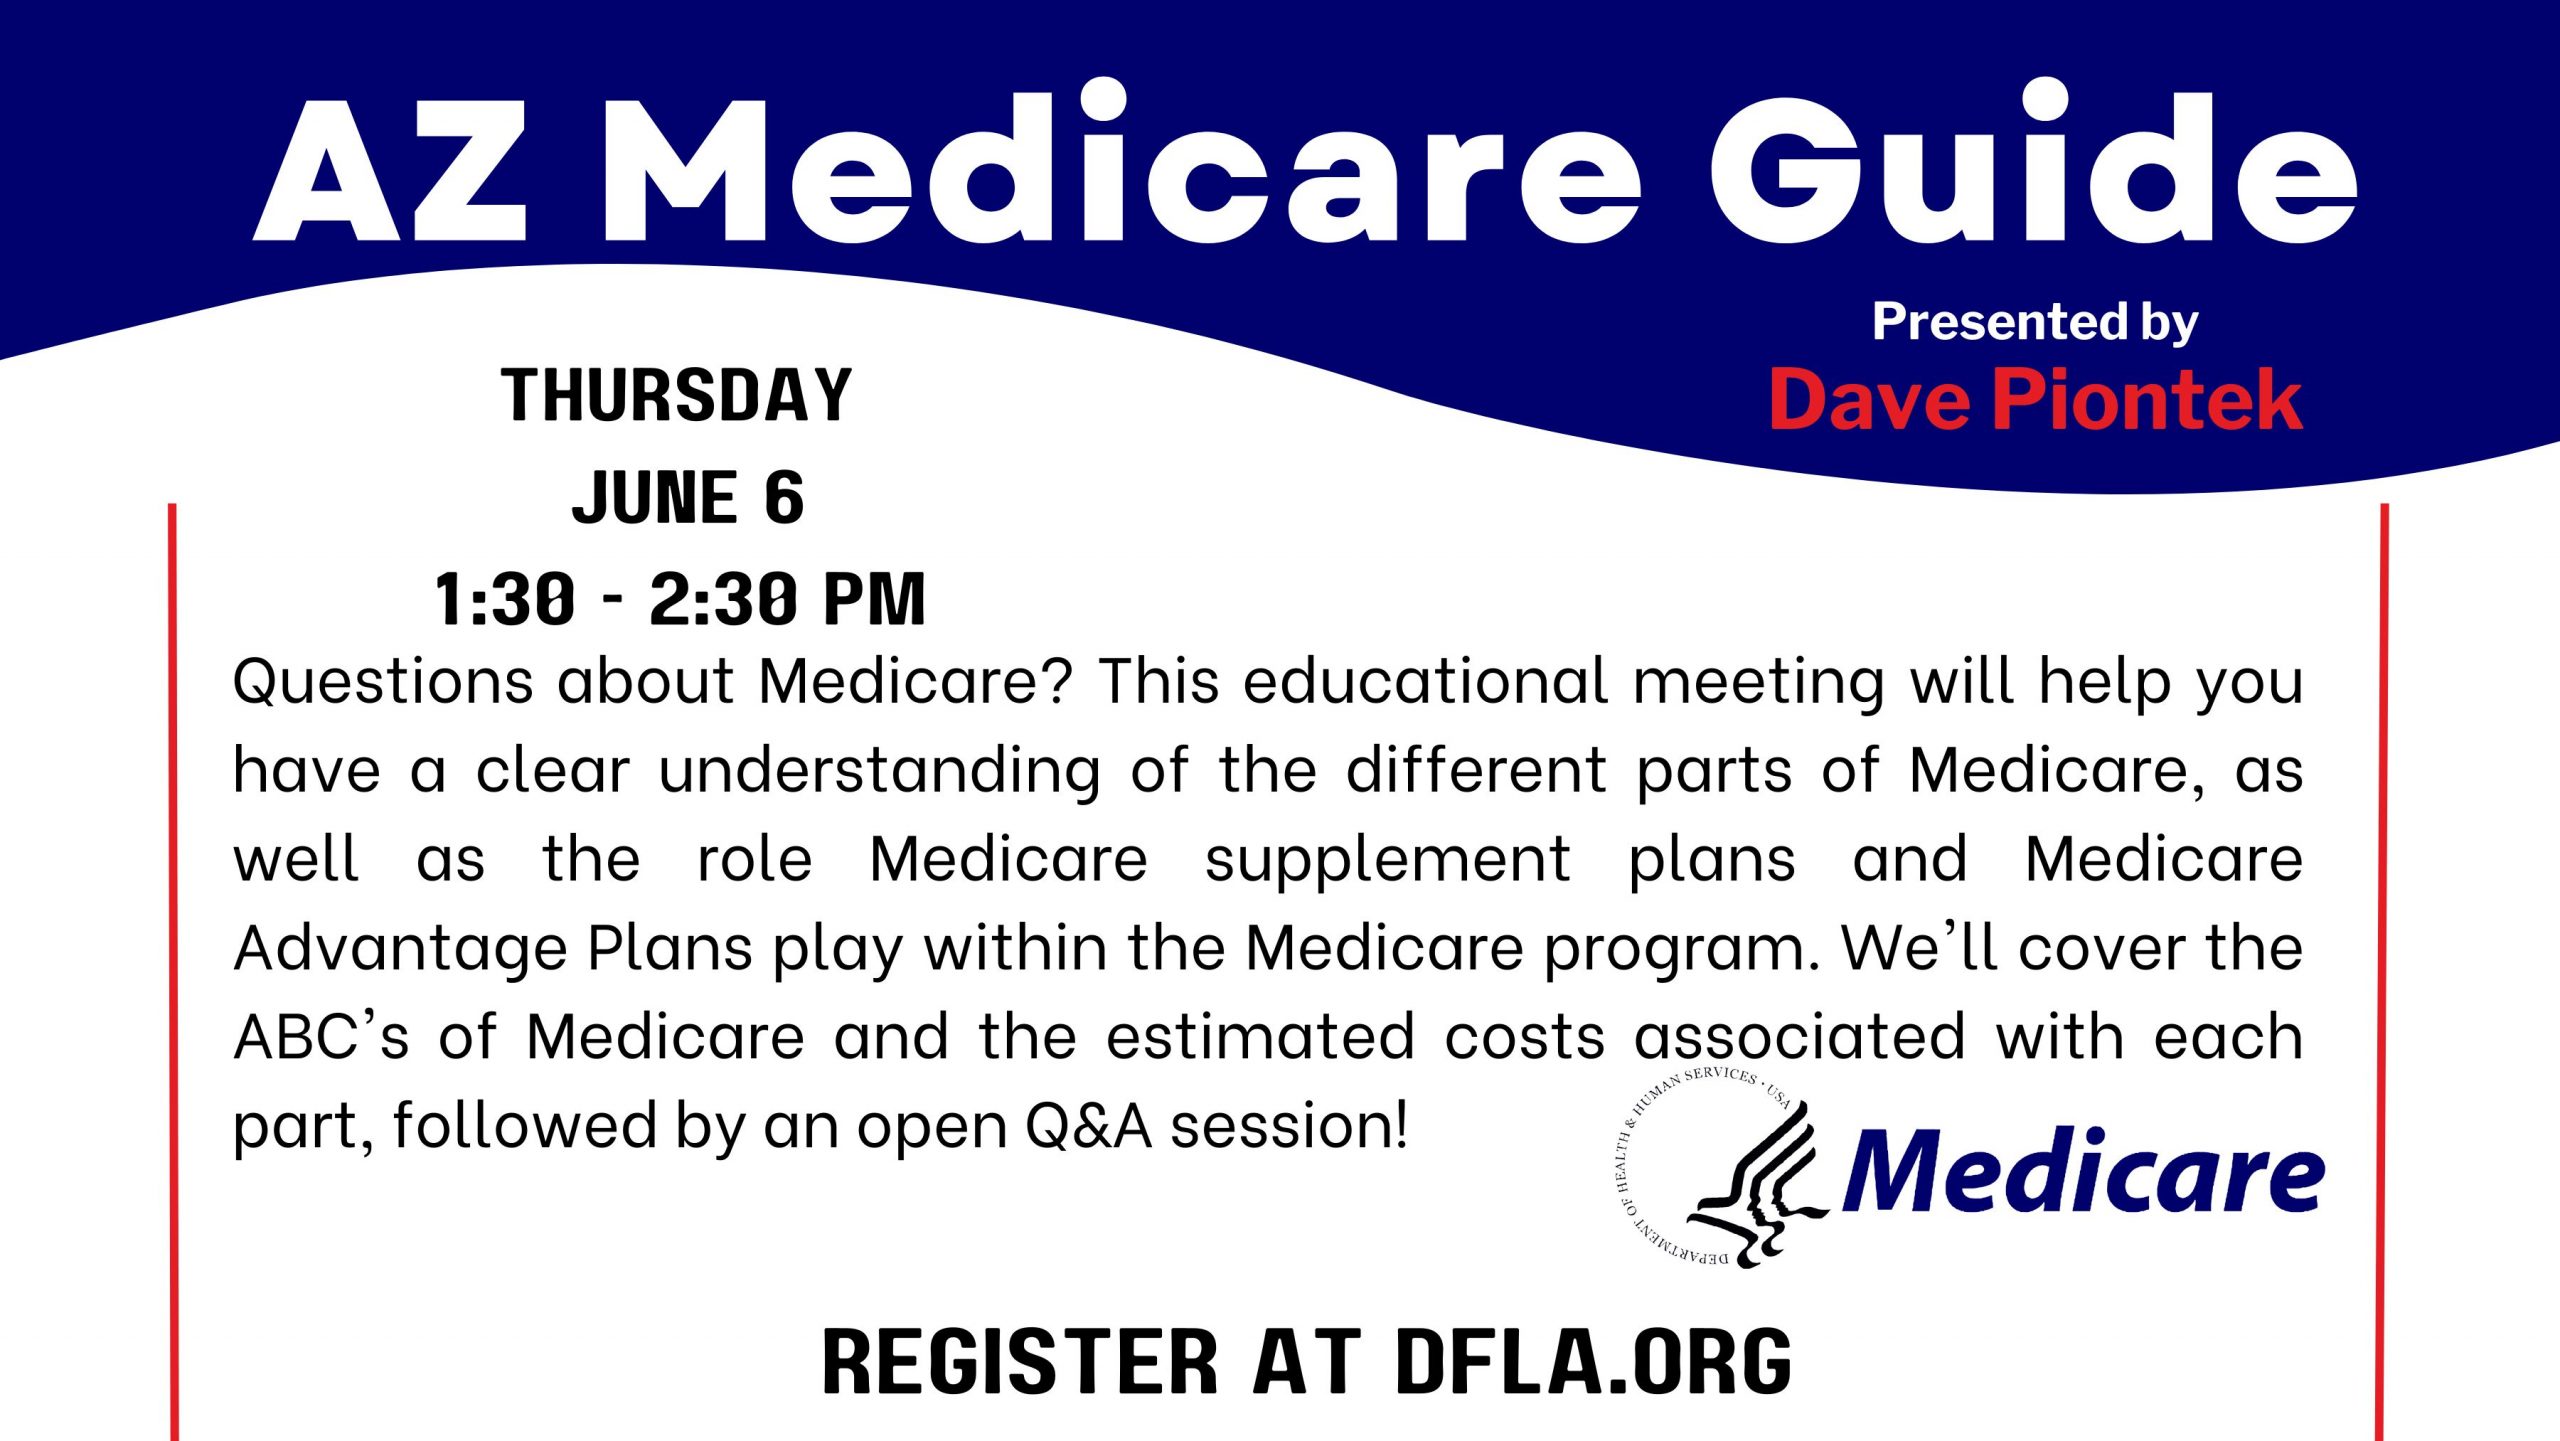 Medicare help at the desert foothills library